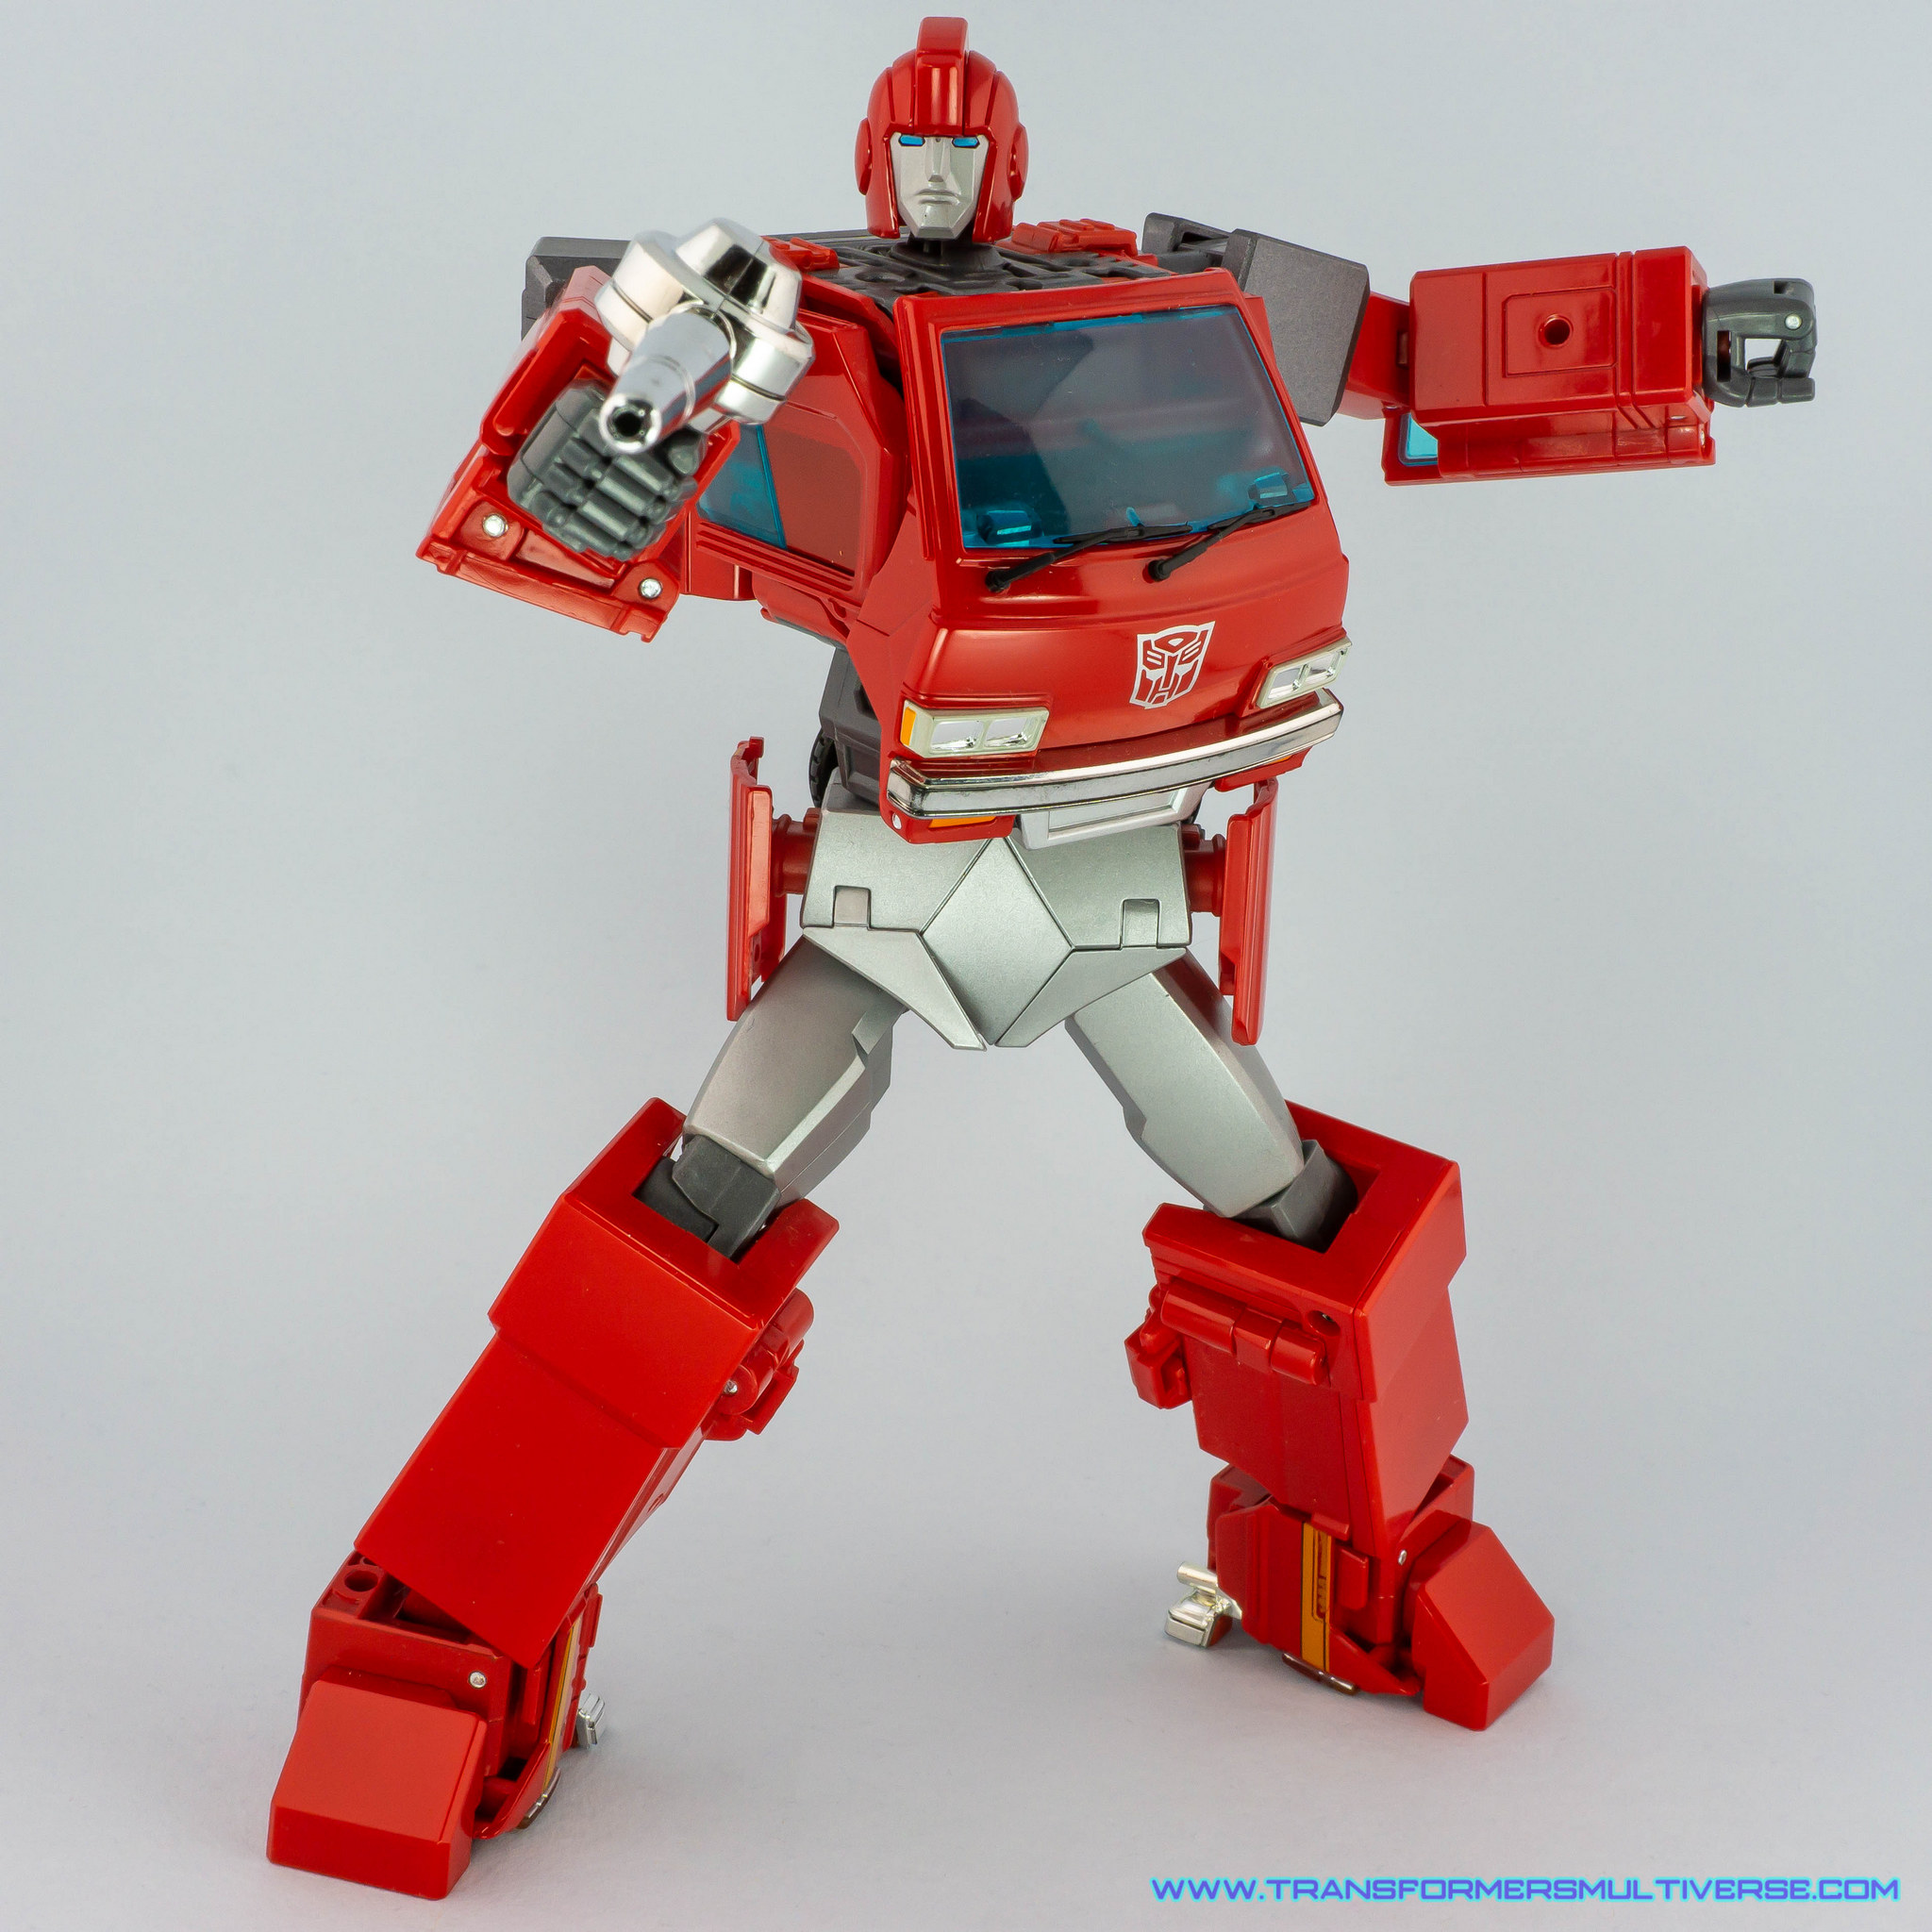 Transformers Masterpiece Ironhide with rifle alternate pose